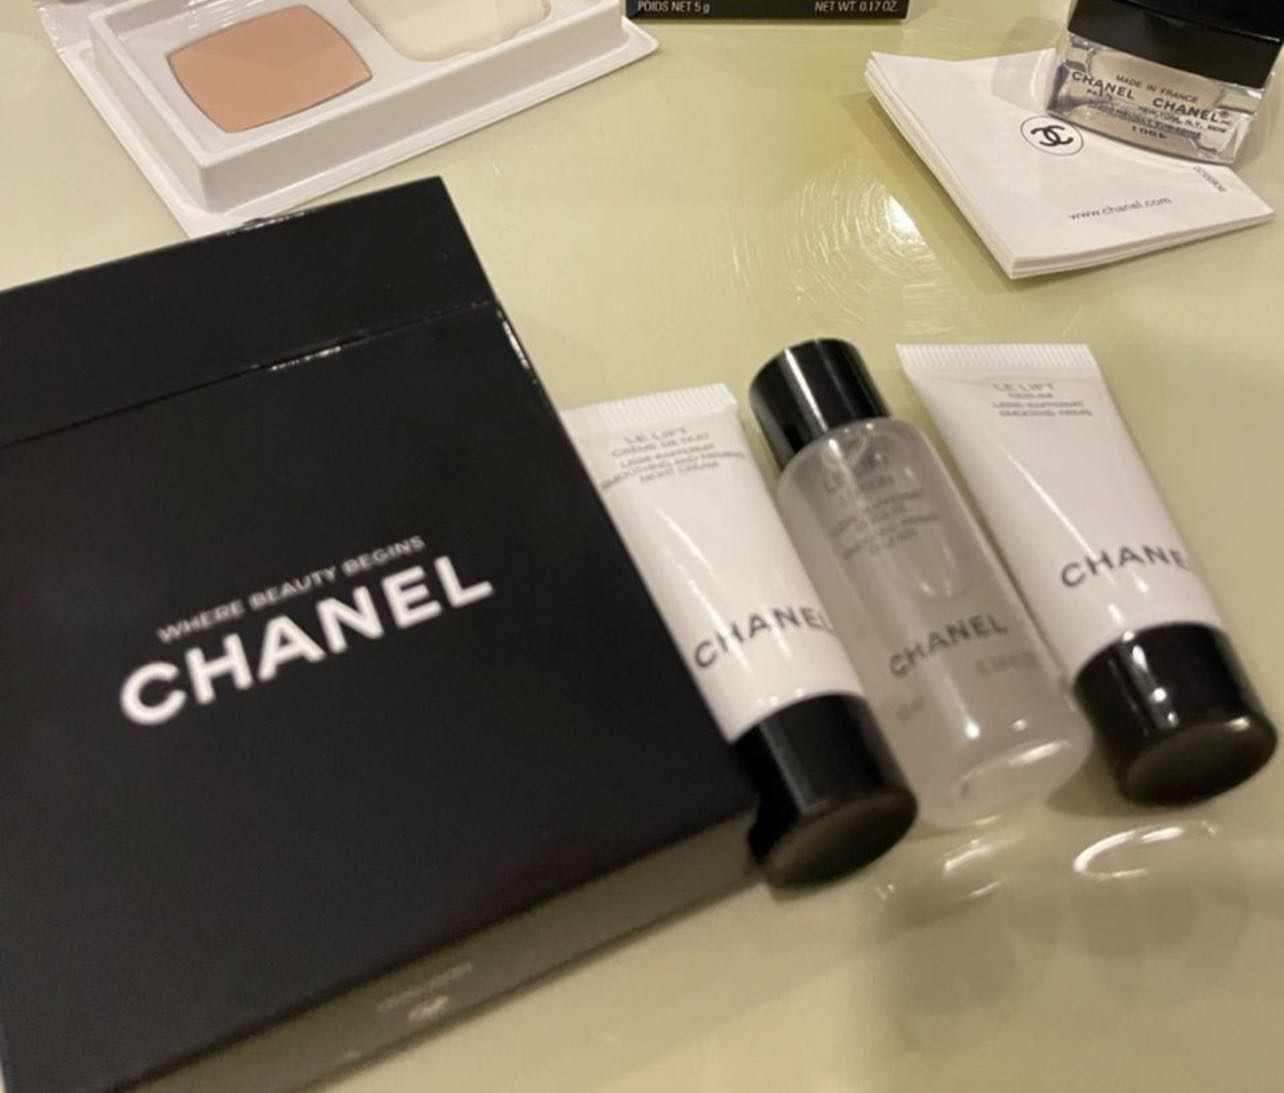 💖 💯 Authentic Chanel CC LE LIFT Where Beauty Begins Set of 3 with Box —  Le Lift Lotion / Smoothing Firming Night Cream / Le Lift Serum 💖